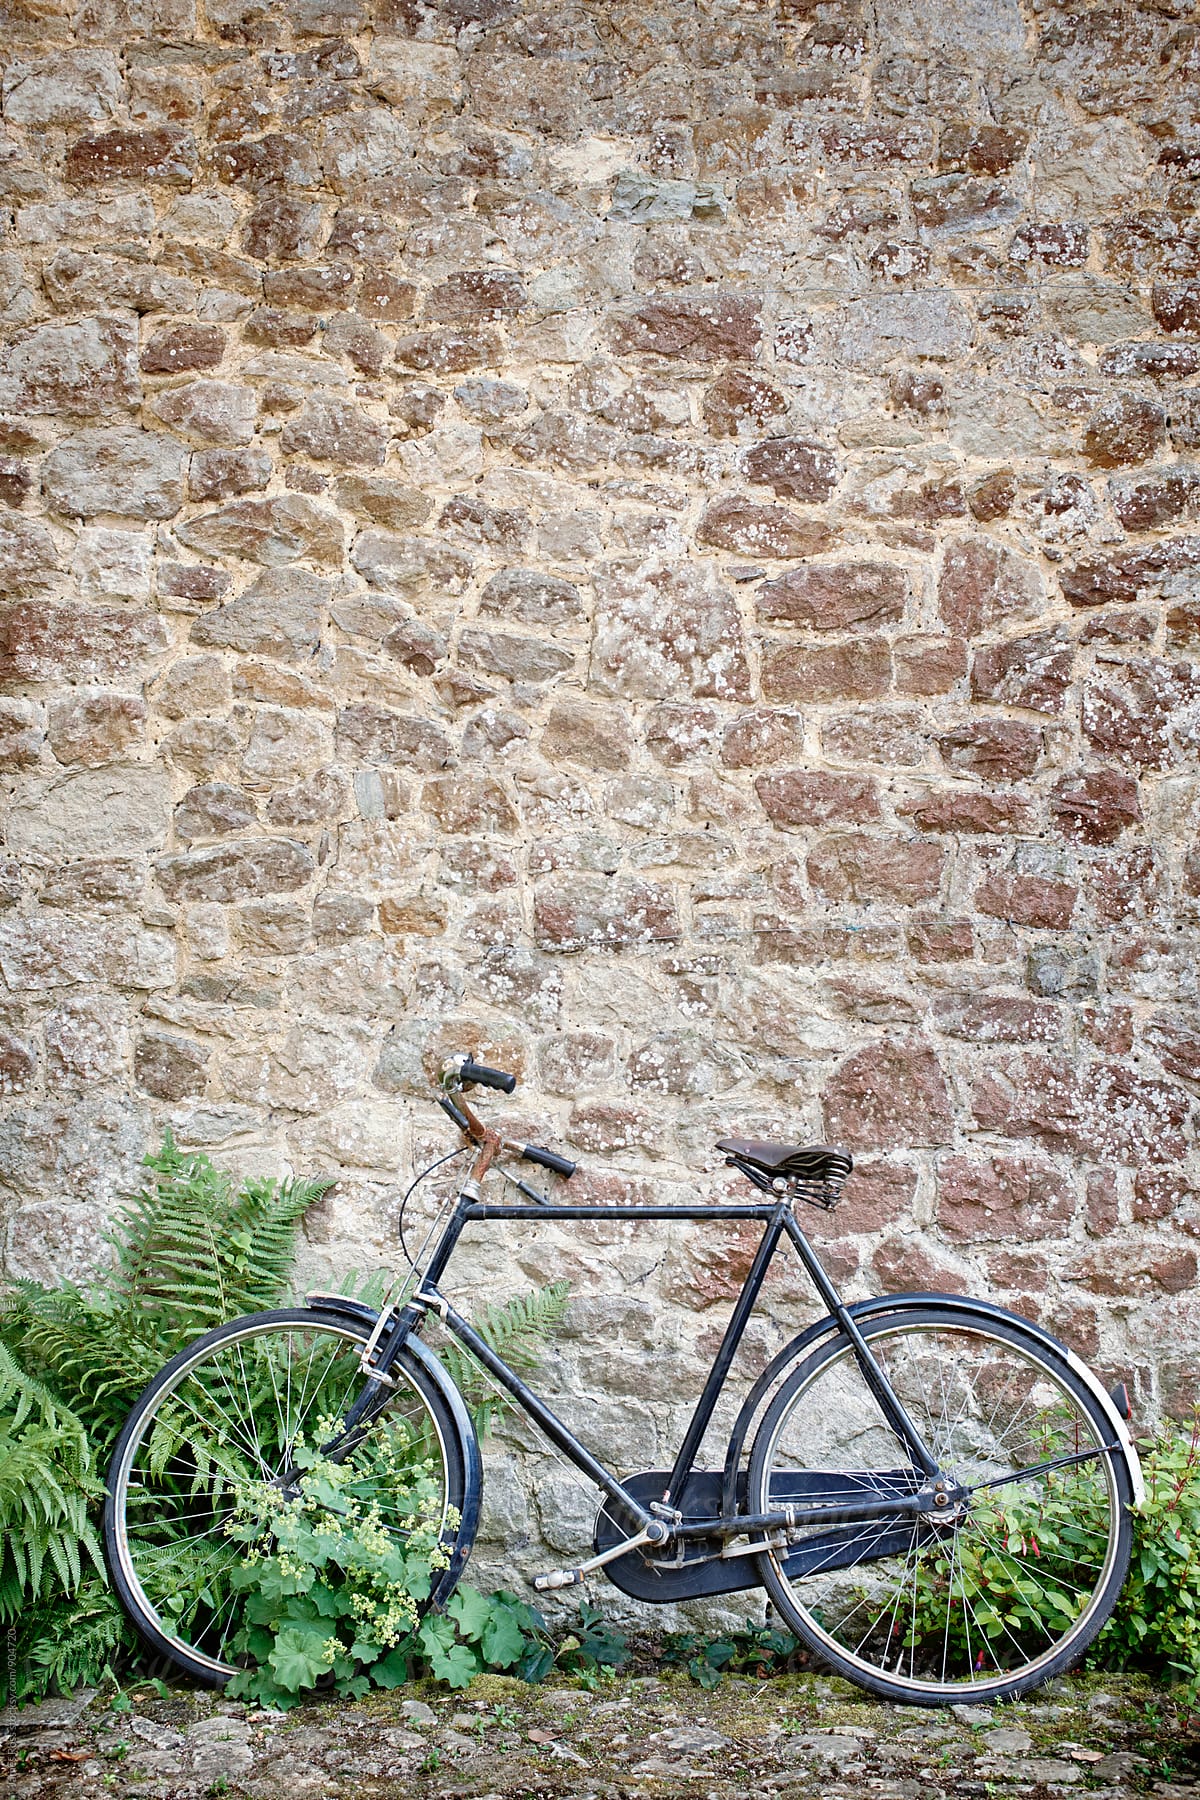 A bicycle against a wall